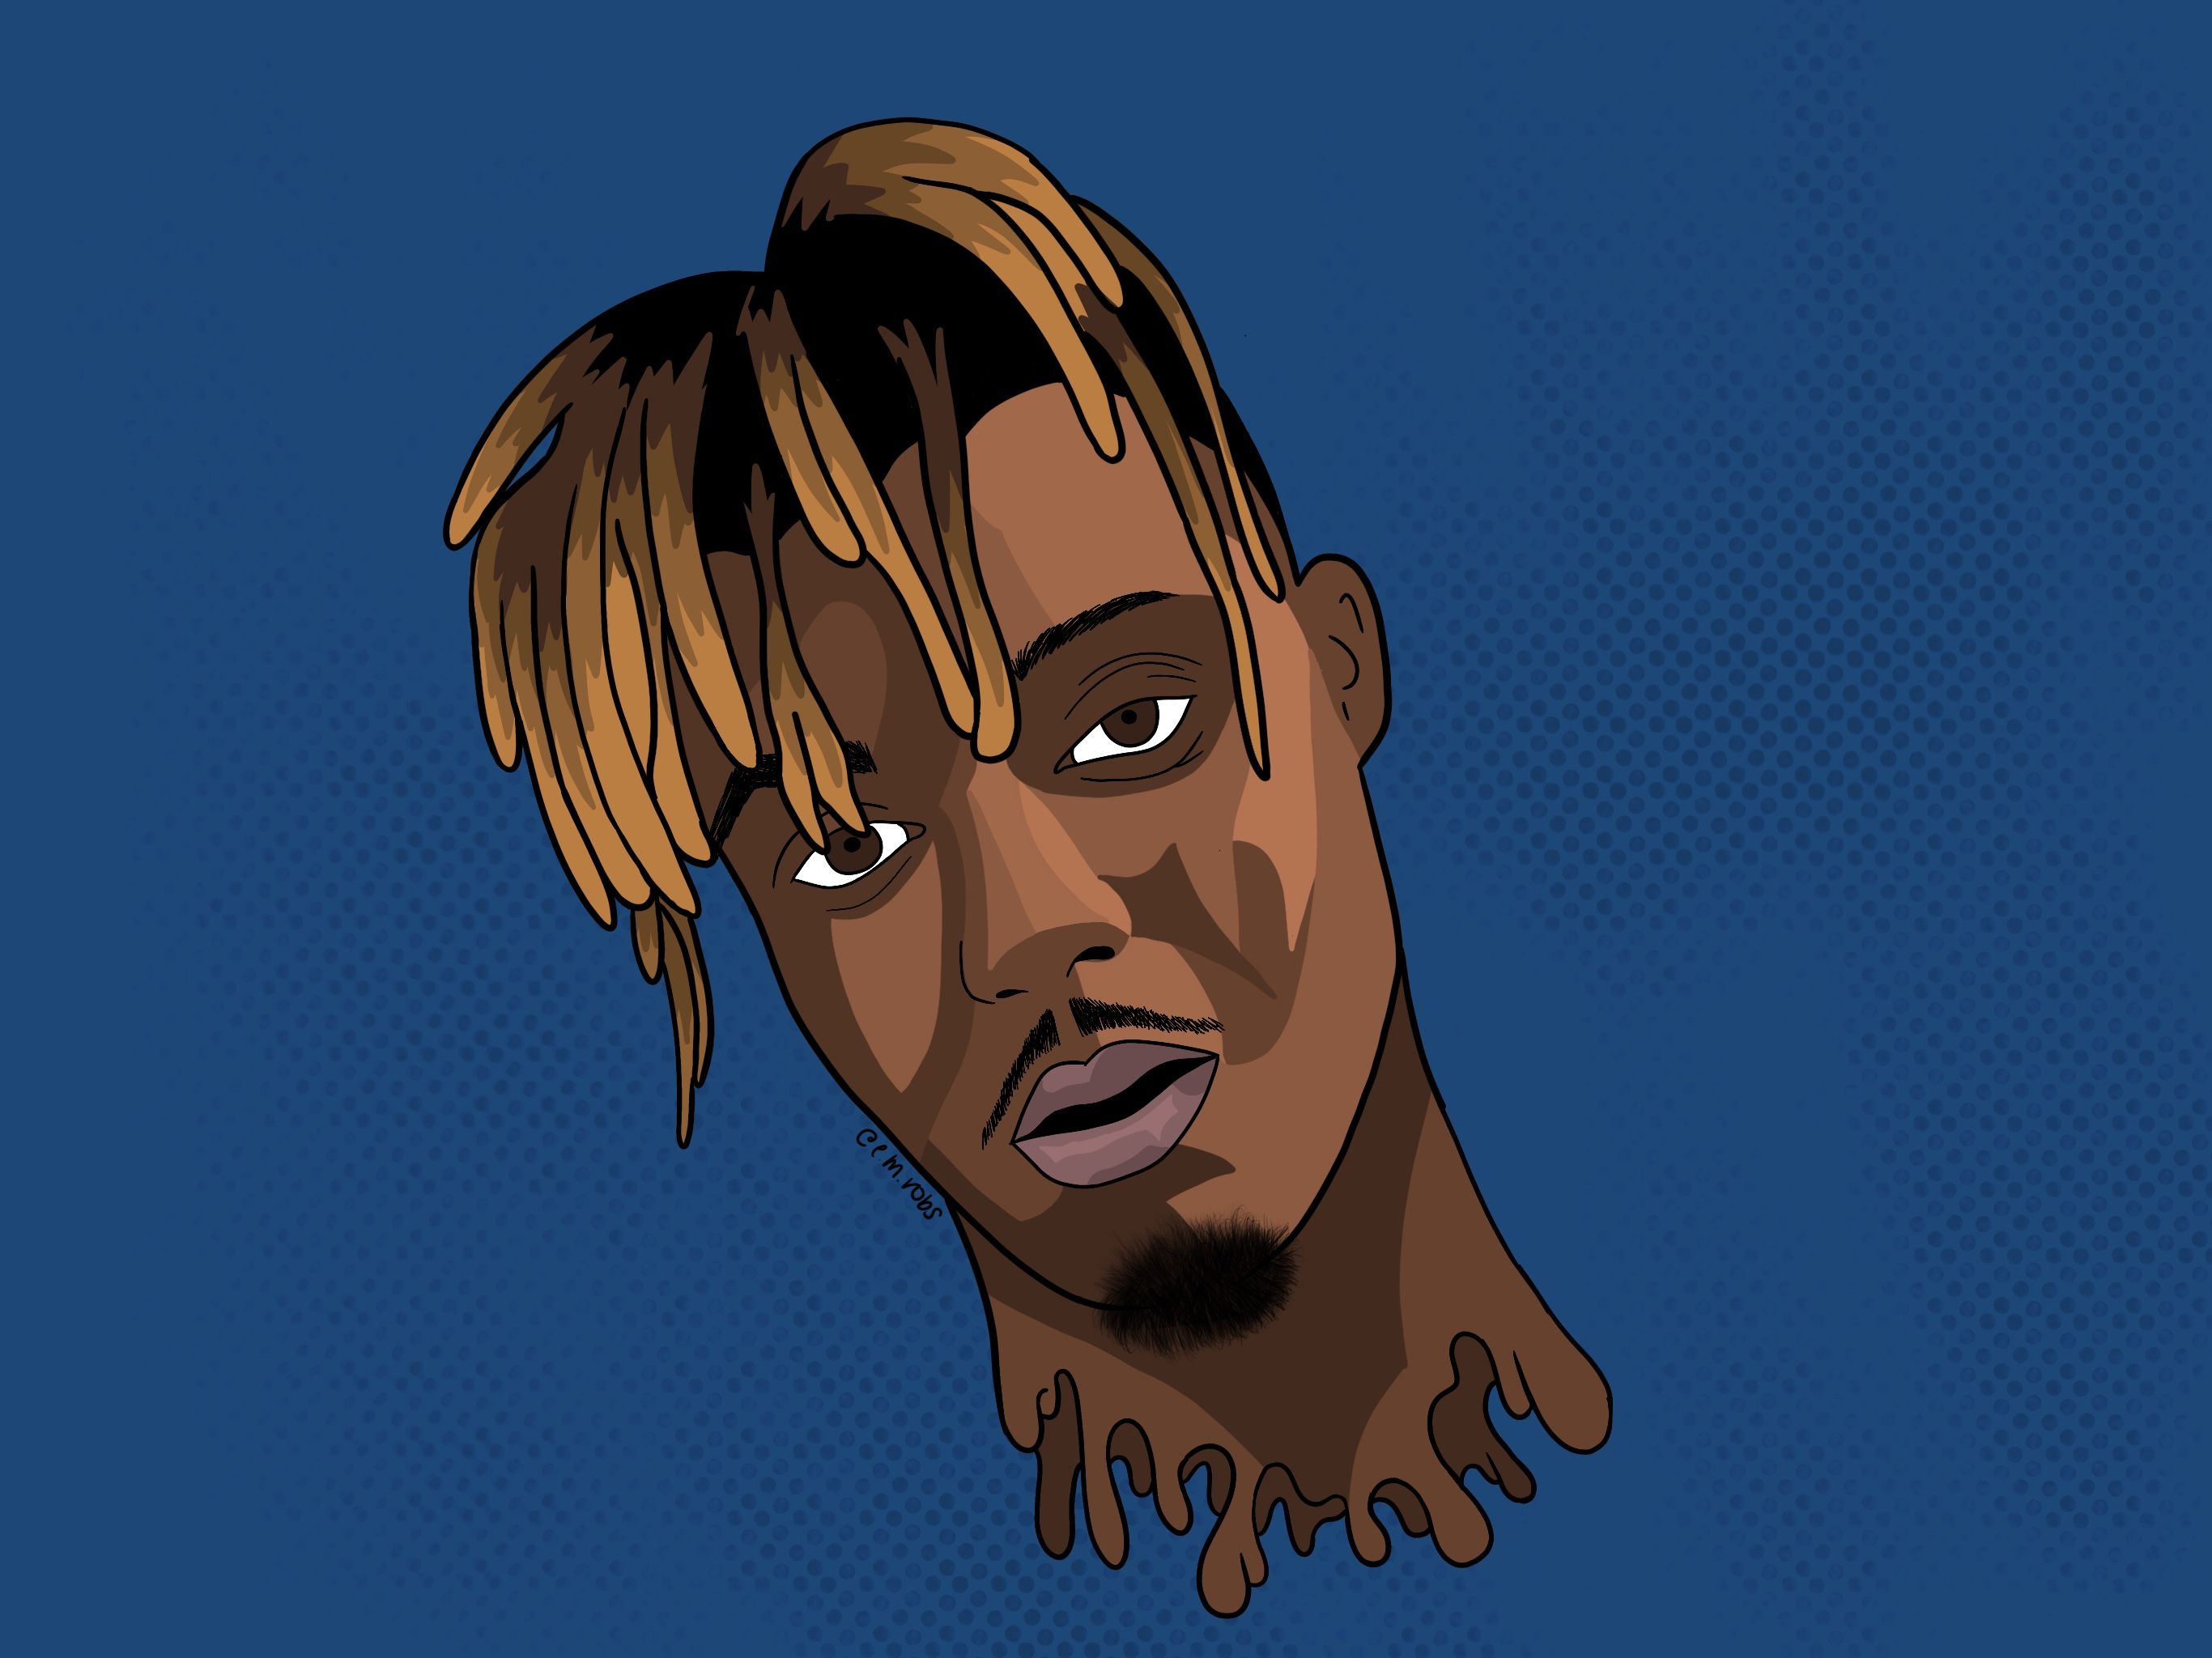 Juice Wrld Pictures To Draw How To Draw Juice Wrld The Simpson Style